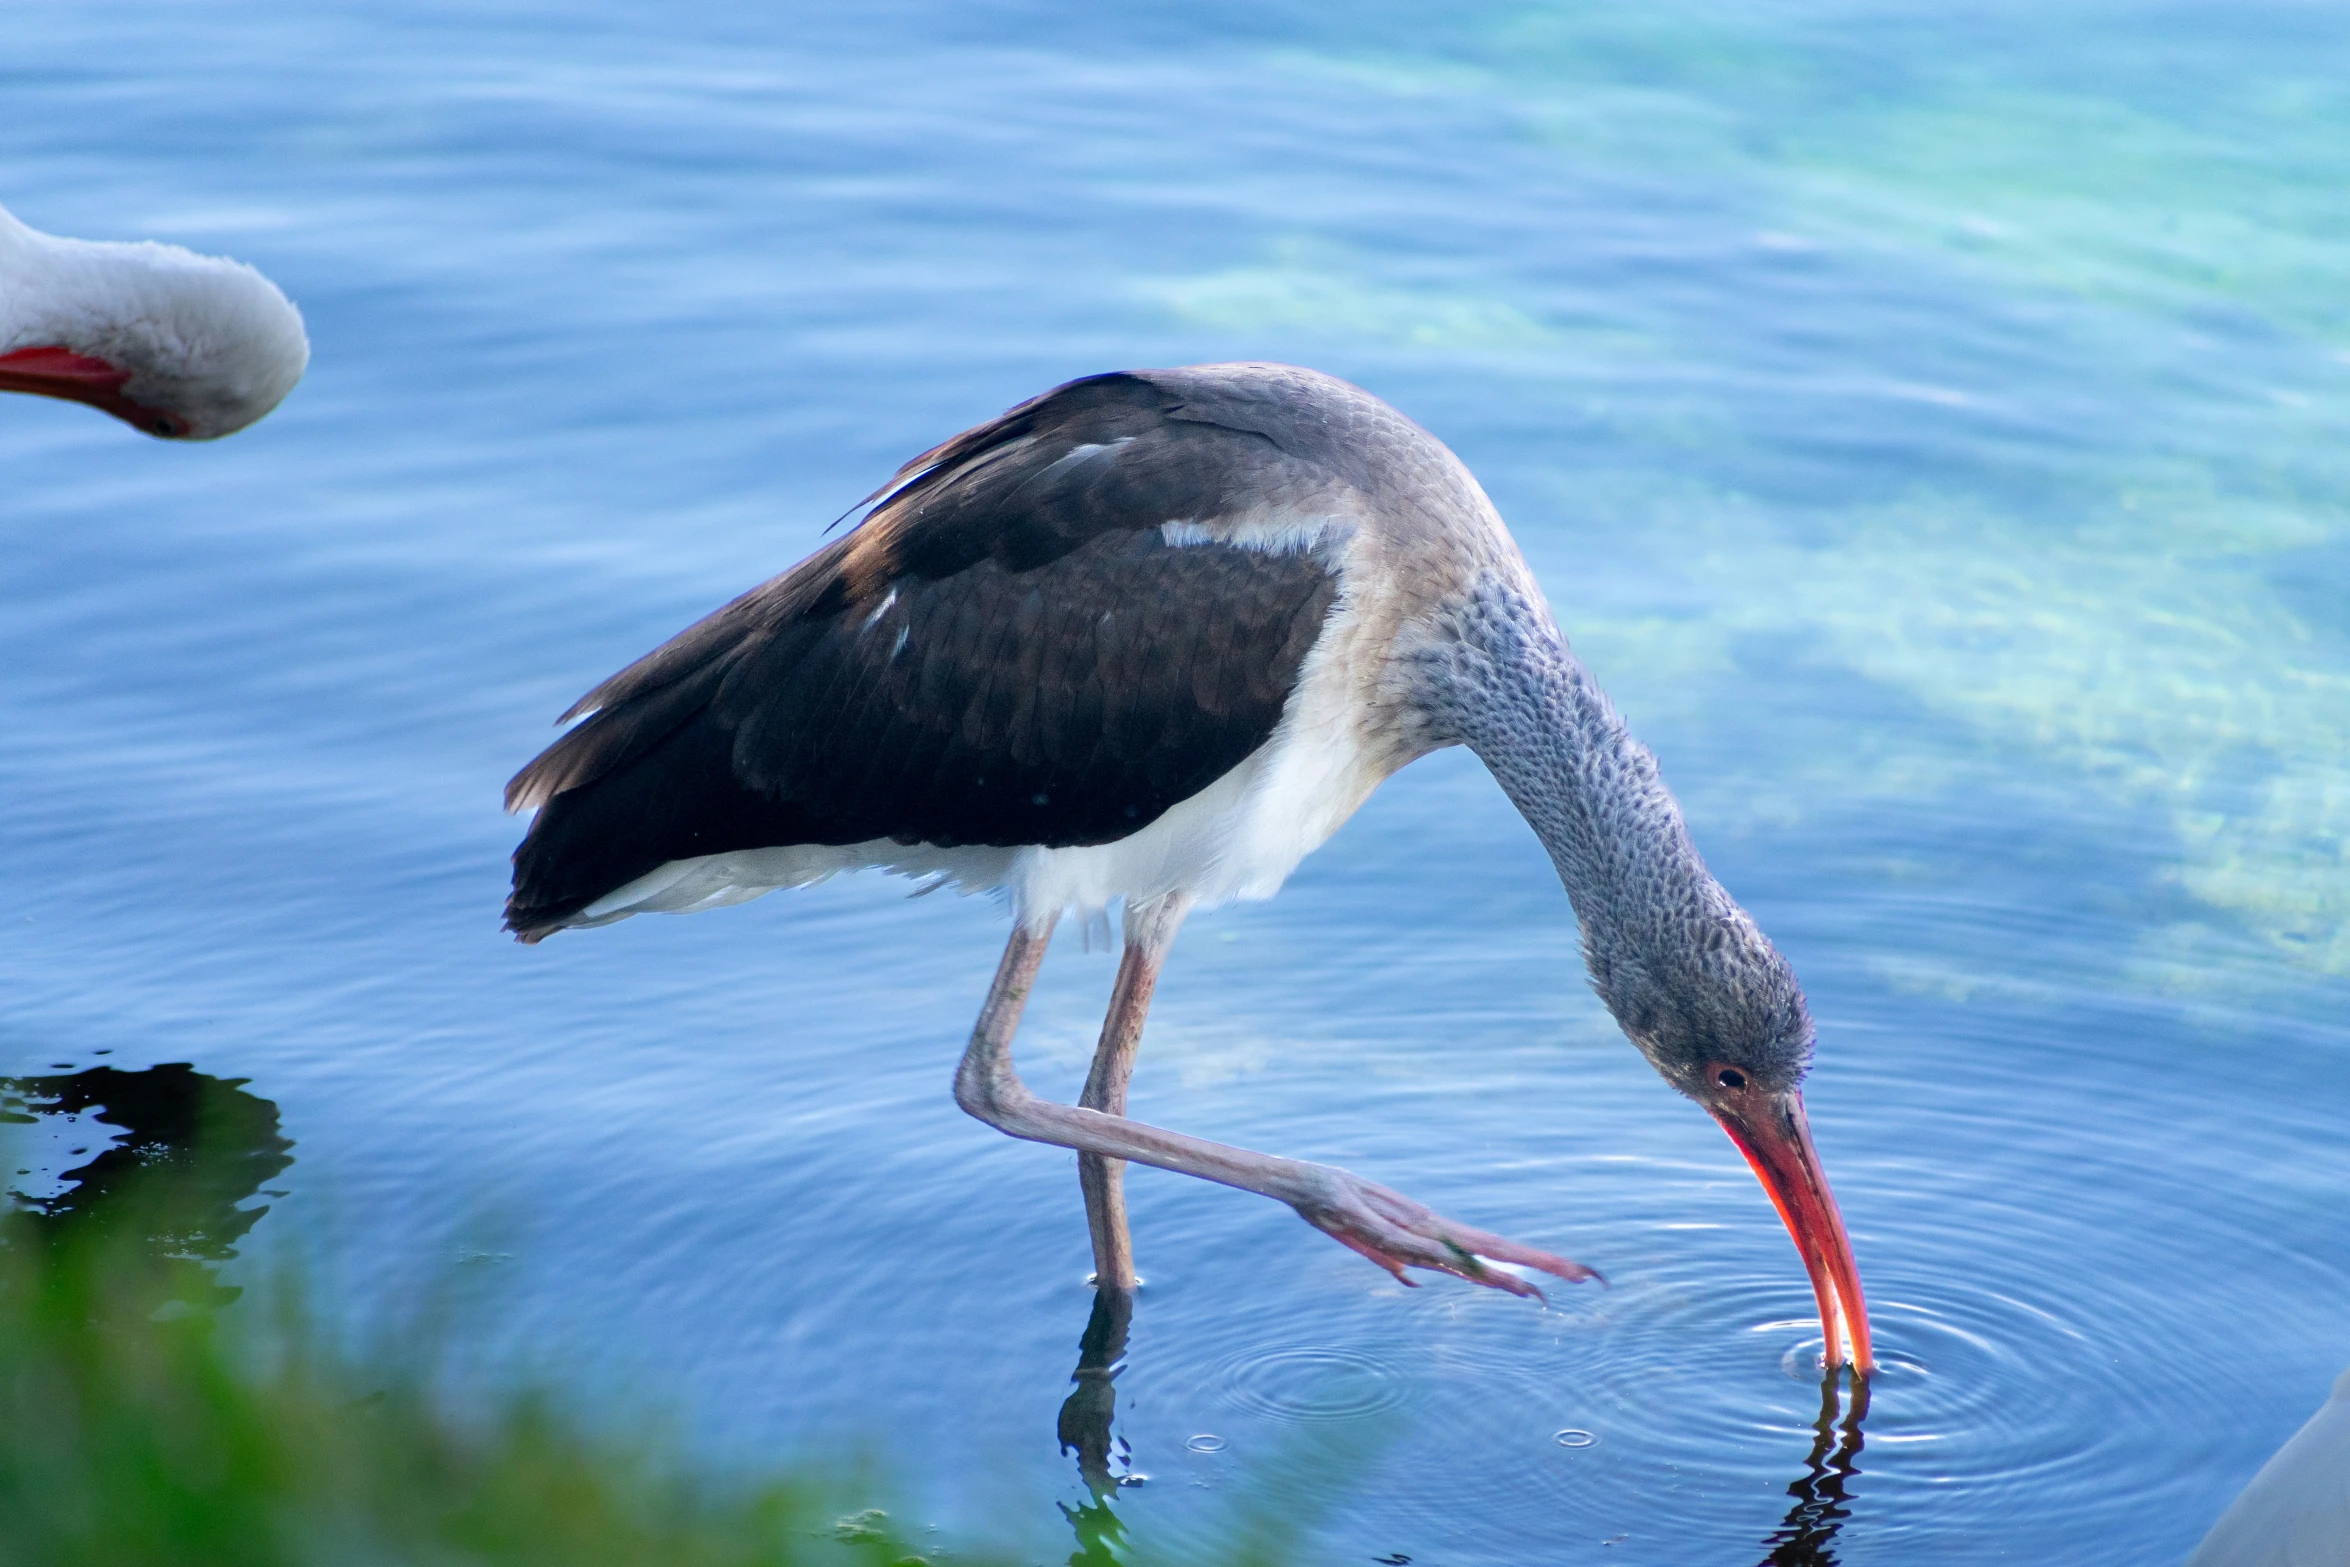 a bird bending down in the water by a shore